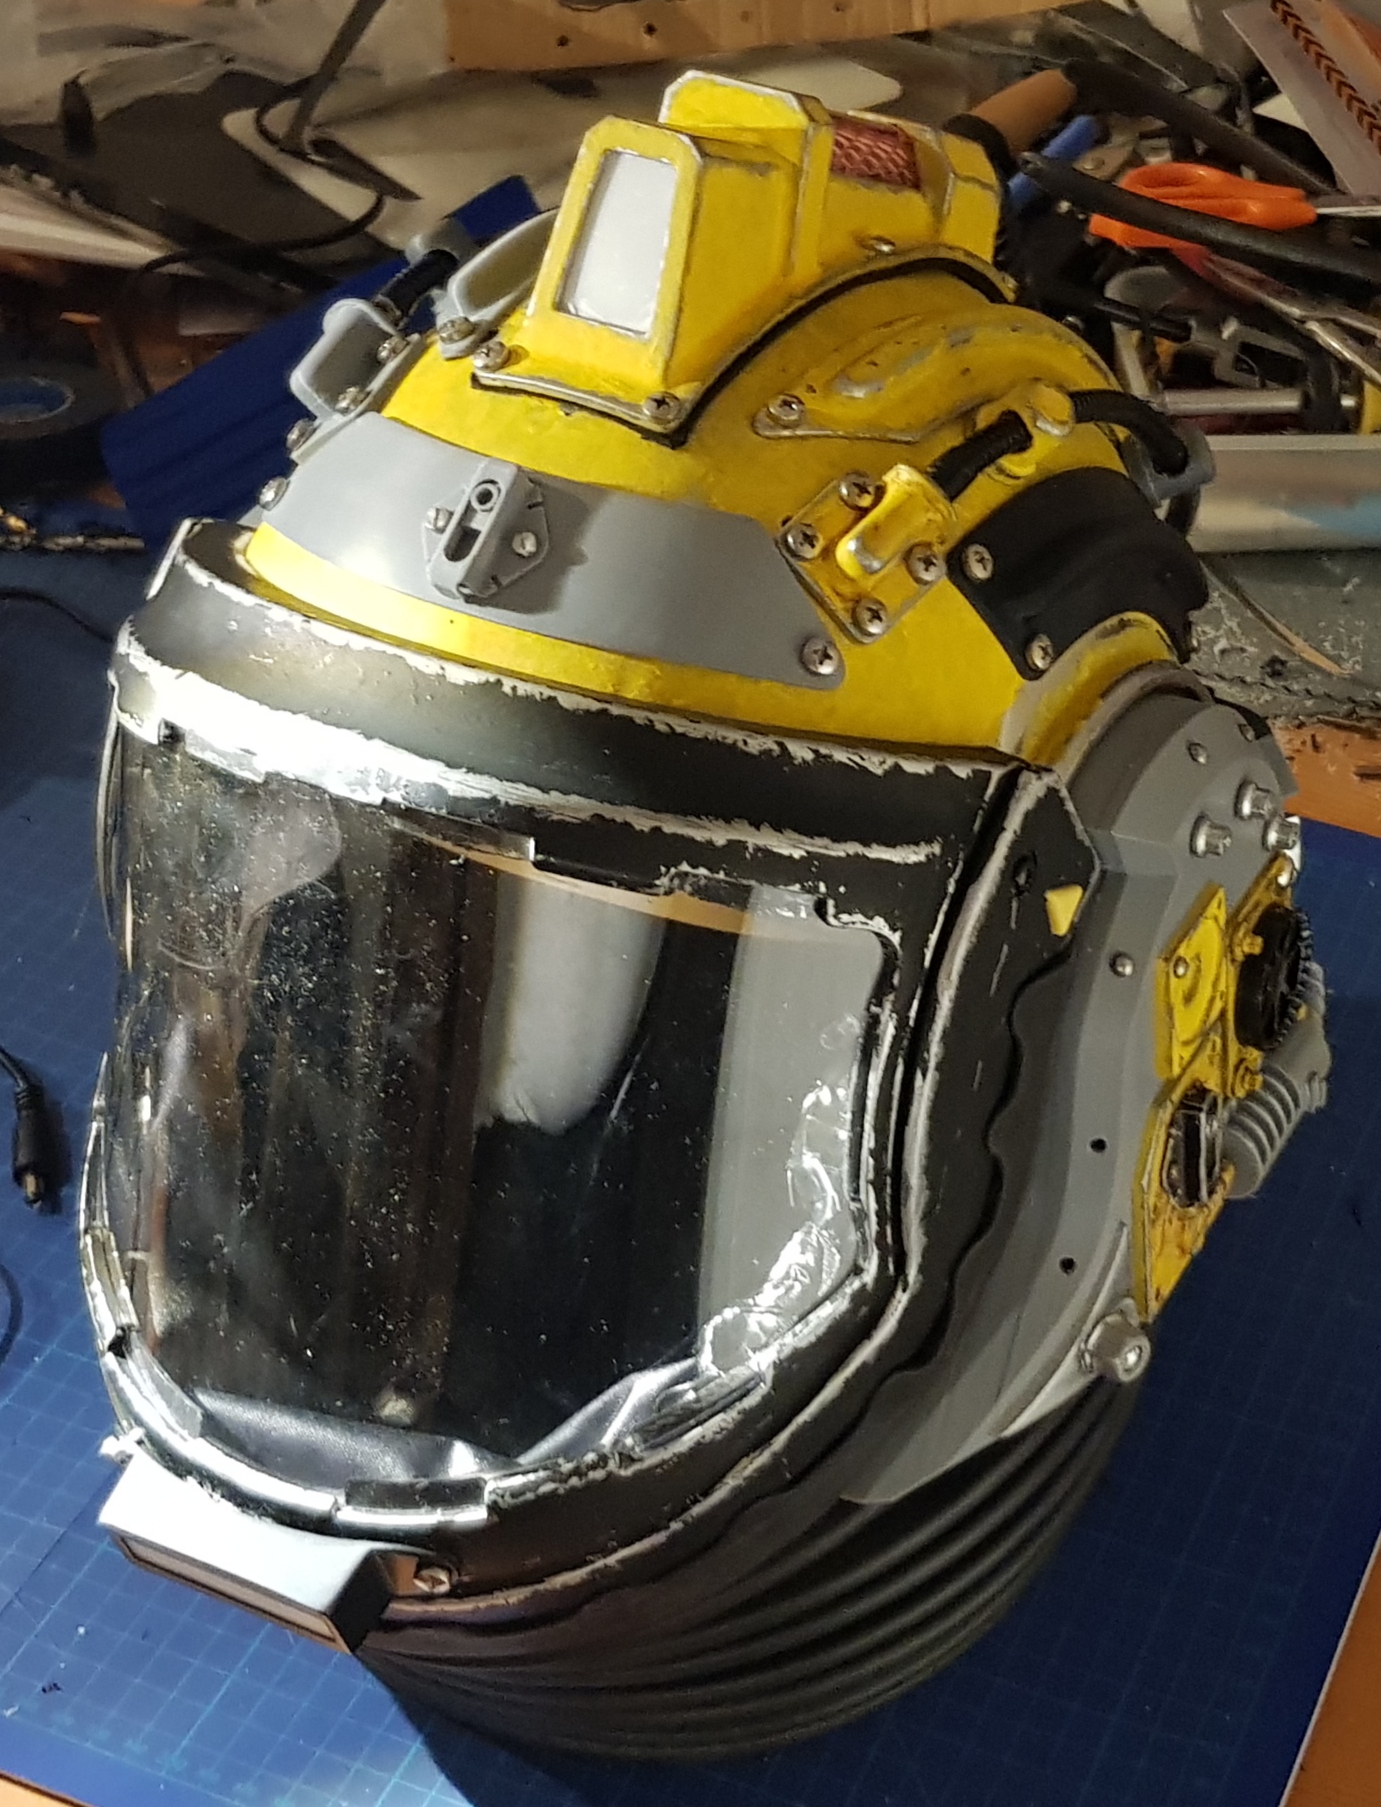 Doctor Who Yellow Space Helmet | RPF Costume and Prop Maker Community